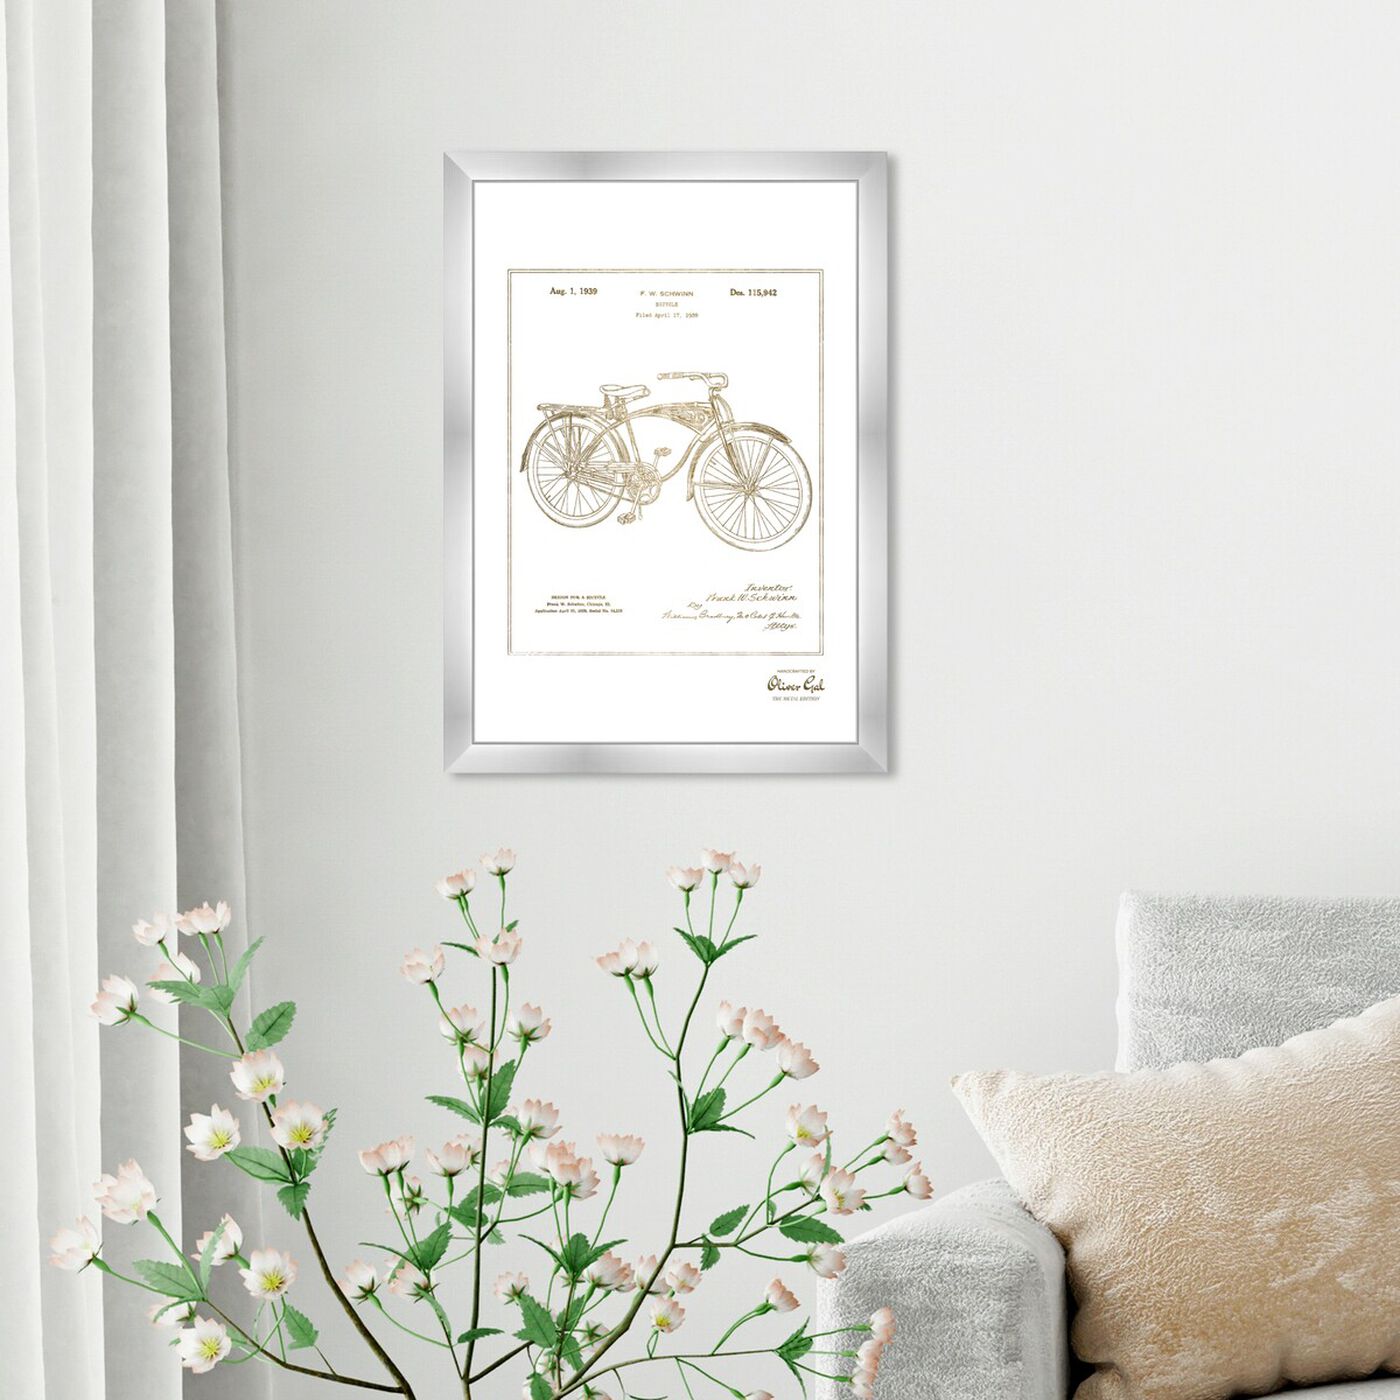 Hanging view of Schwinn Bicycle Gold featuring transportation and motorcycles art.